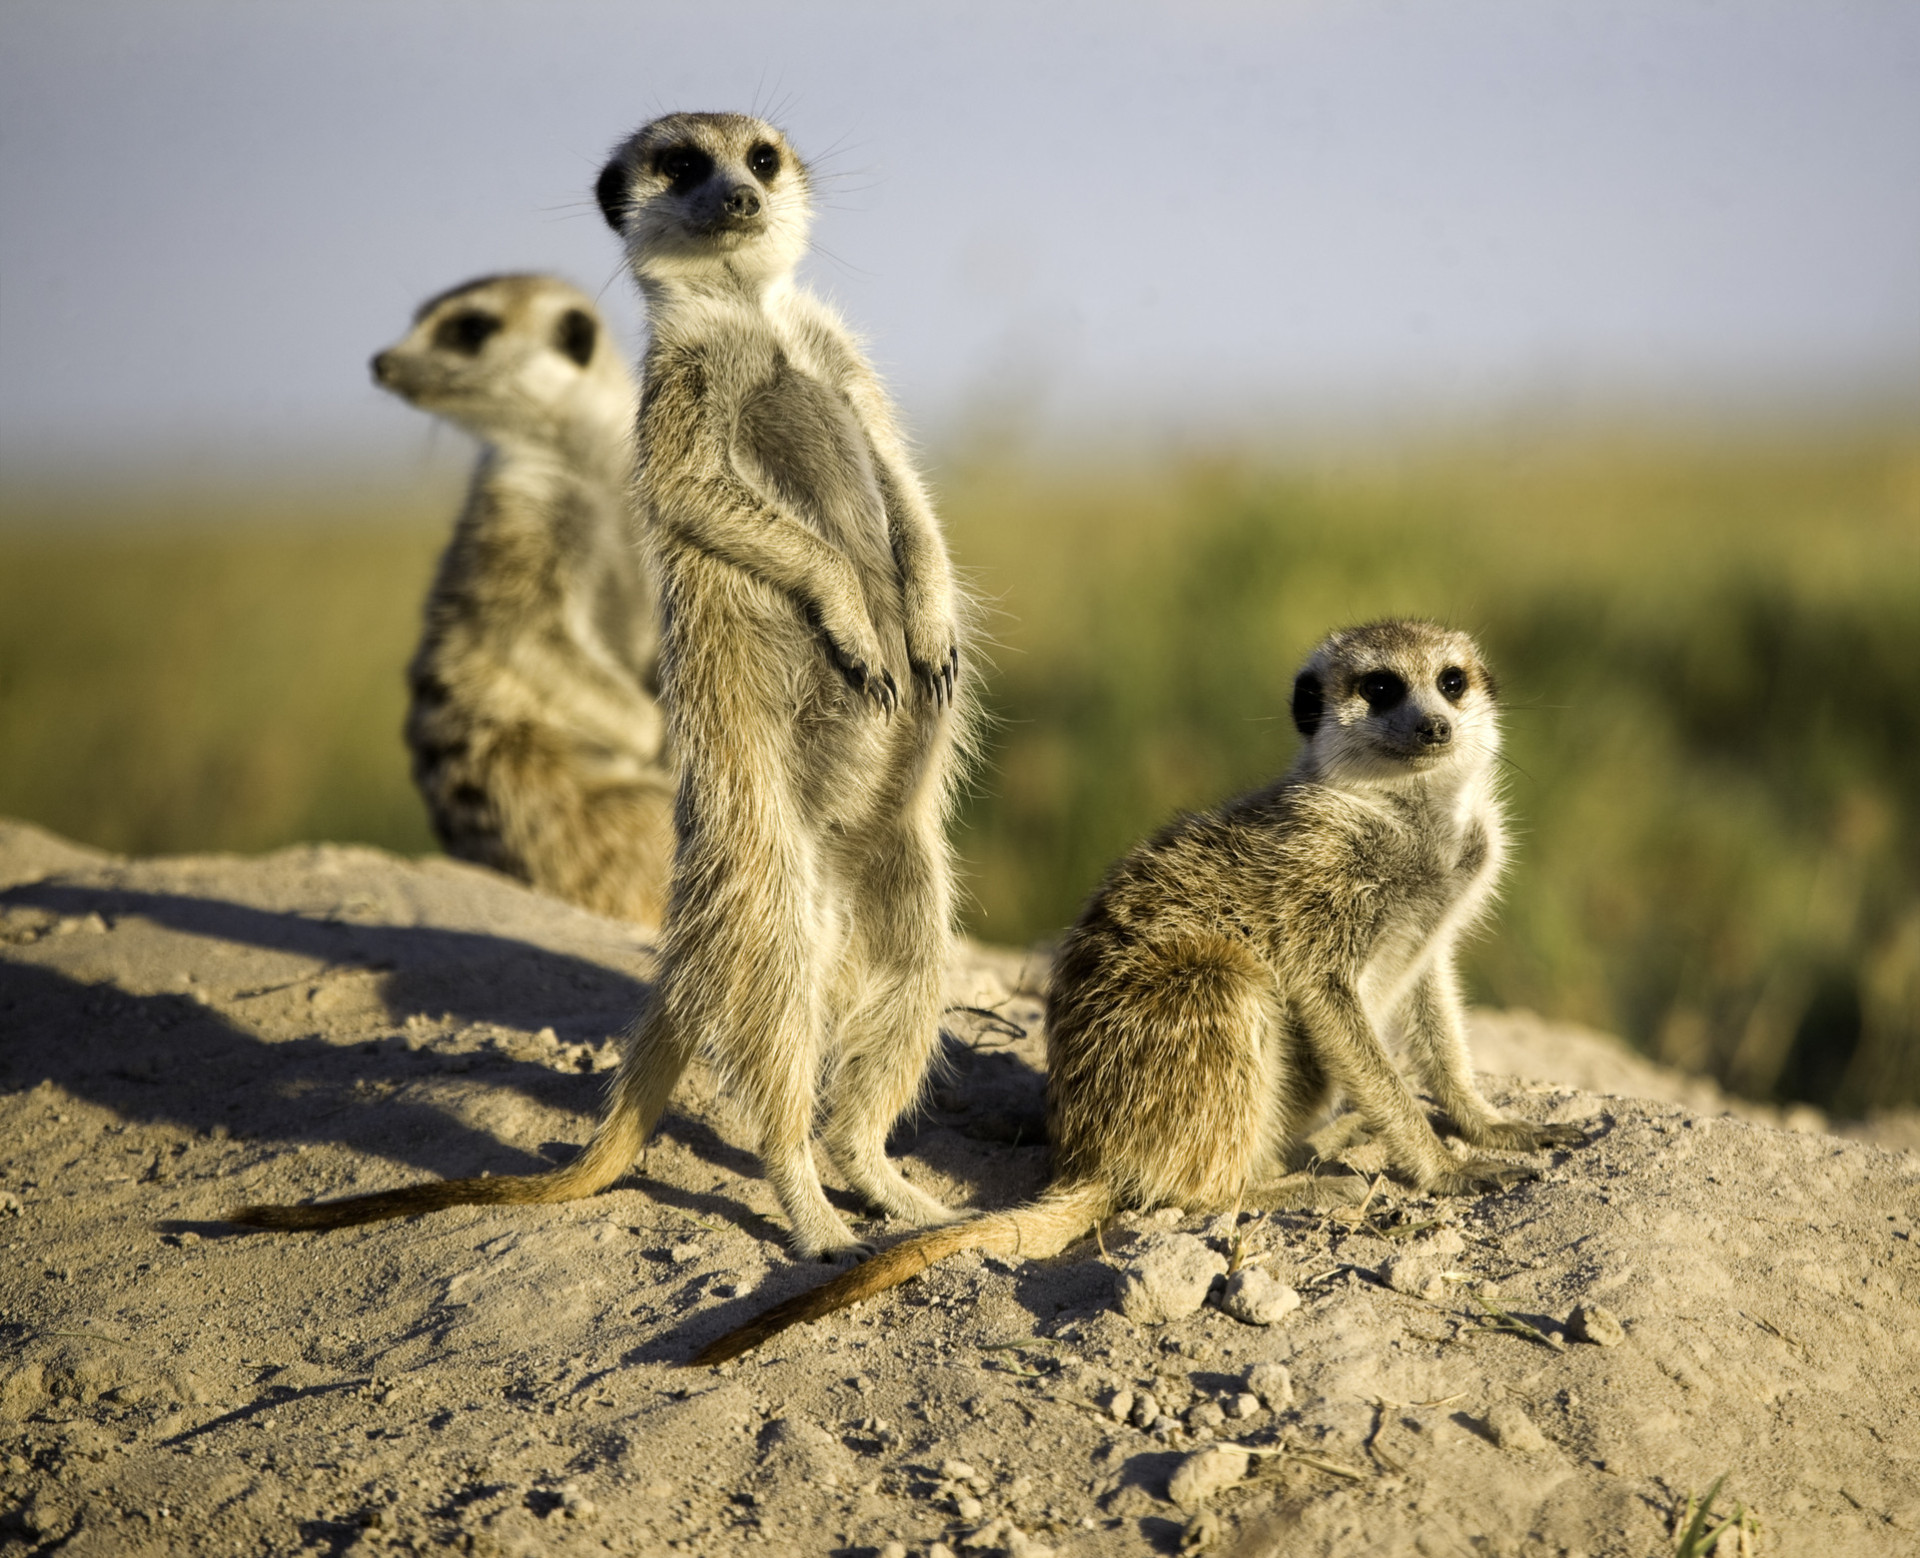 In addition to lions, you can also find species such as ostriches, gazelles, and even meerkats.<p><a href="https://www.msn.com/en-us/community/channel/vid-7xx8mnucu55yw63we9va2gwr7uihbxwc68fxqp25x6tg4ftibpra?cvid=94631541bc0f4f89bfd59158d696ad7e">Follow us and access great exclusive content every day</a></p>